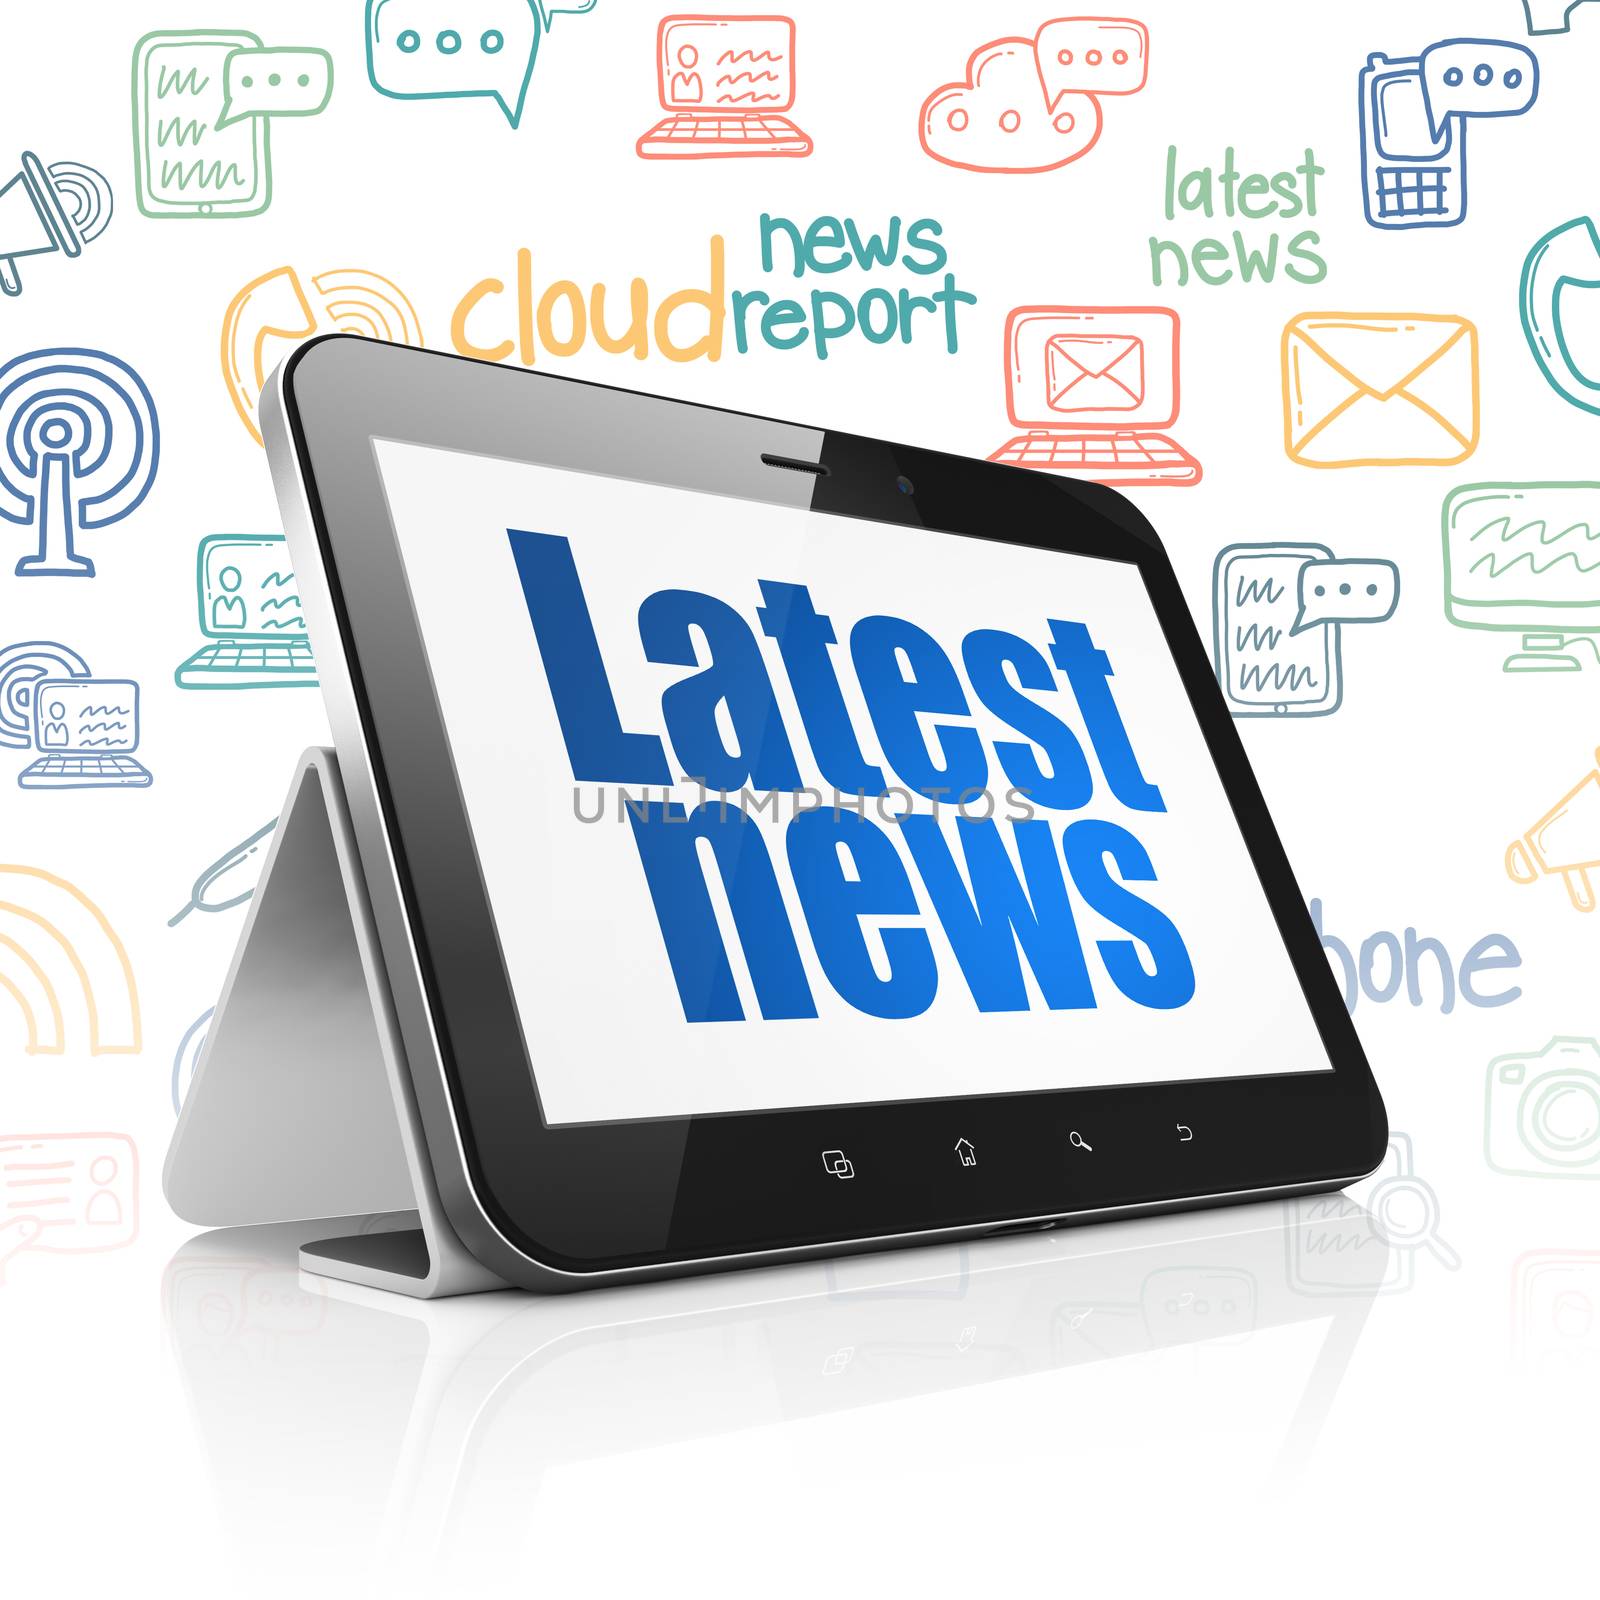 News concept: Tablet Computer with  blue text Latest News on display,  Hand Drawn News Icons background, 3D rendering